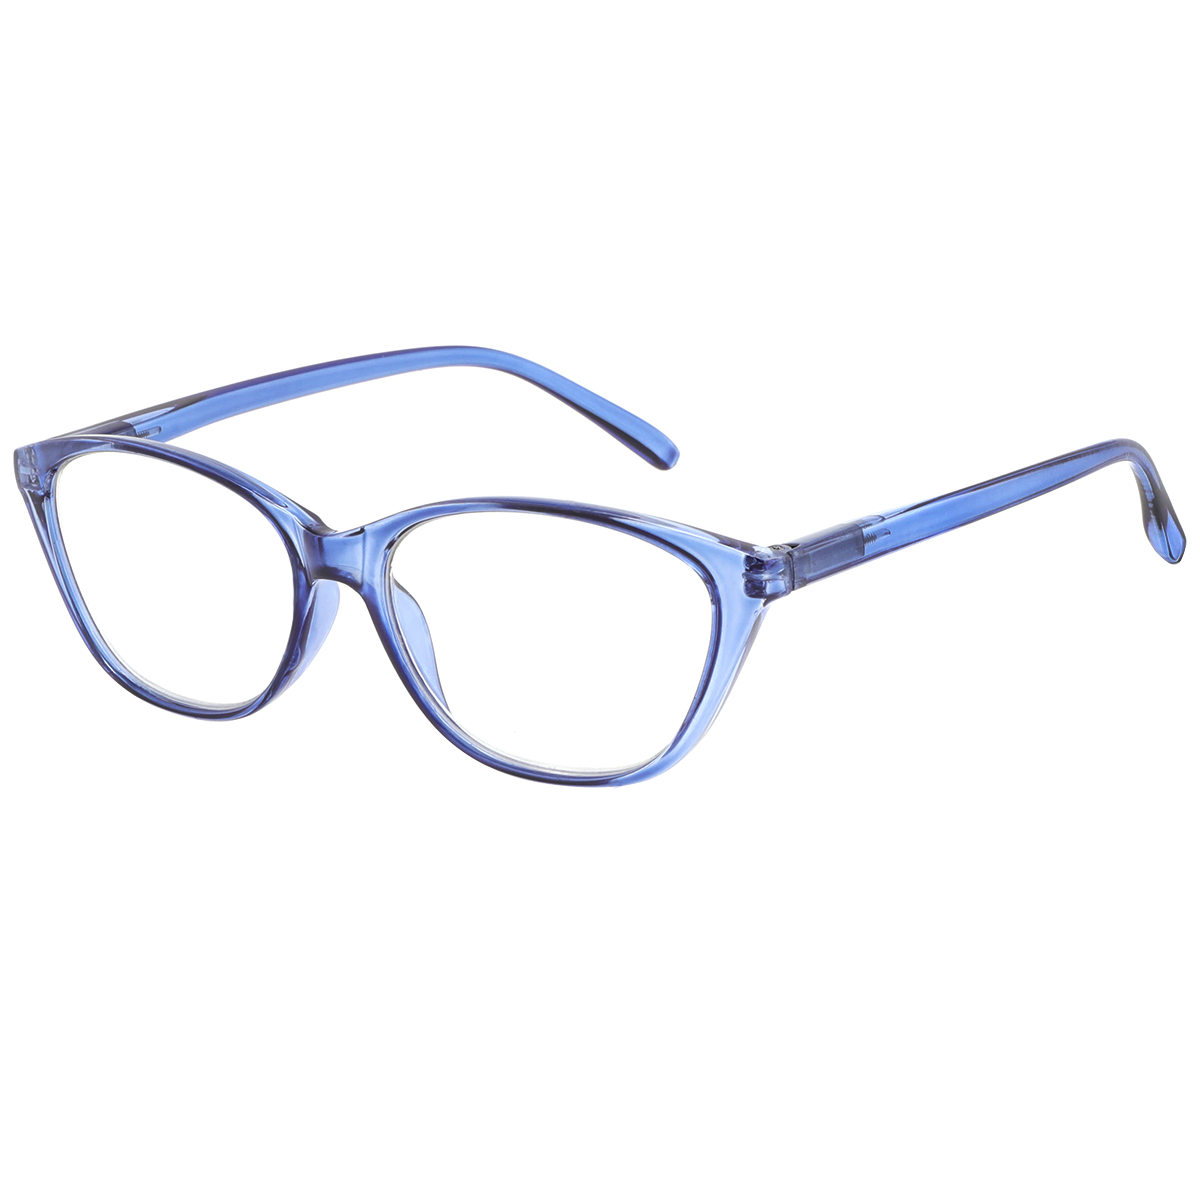 Claire - Cat-eye Blue Reading Glasses for Women